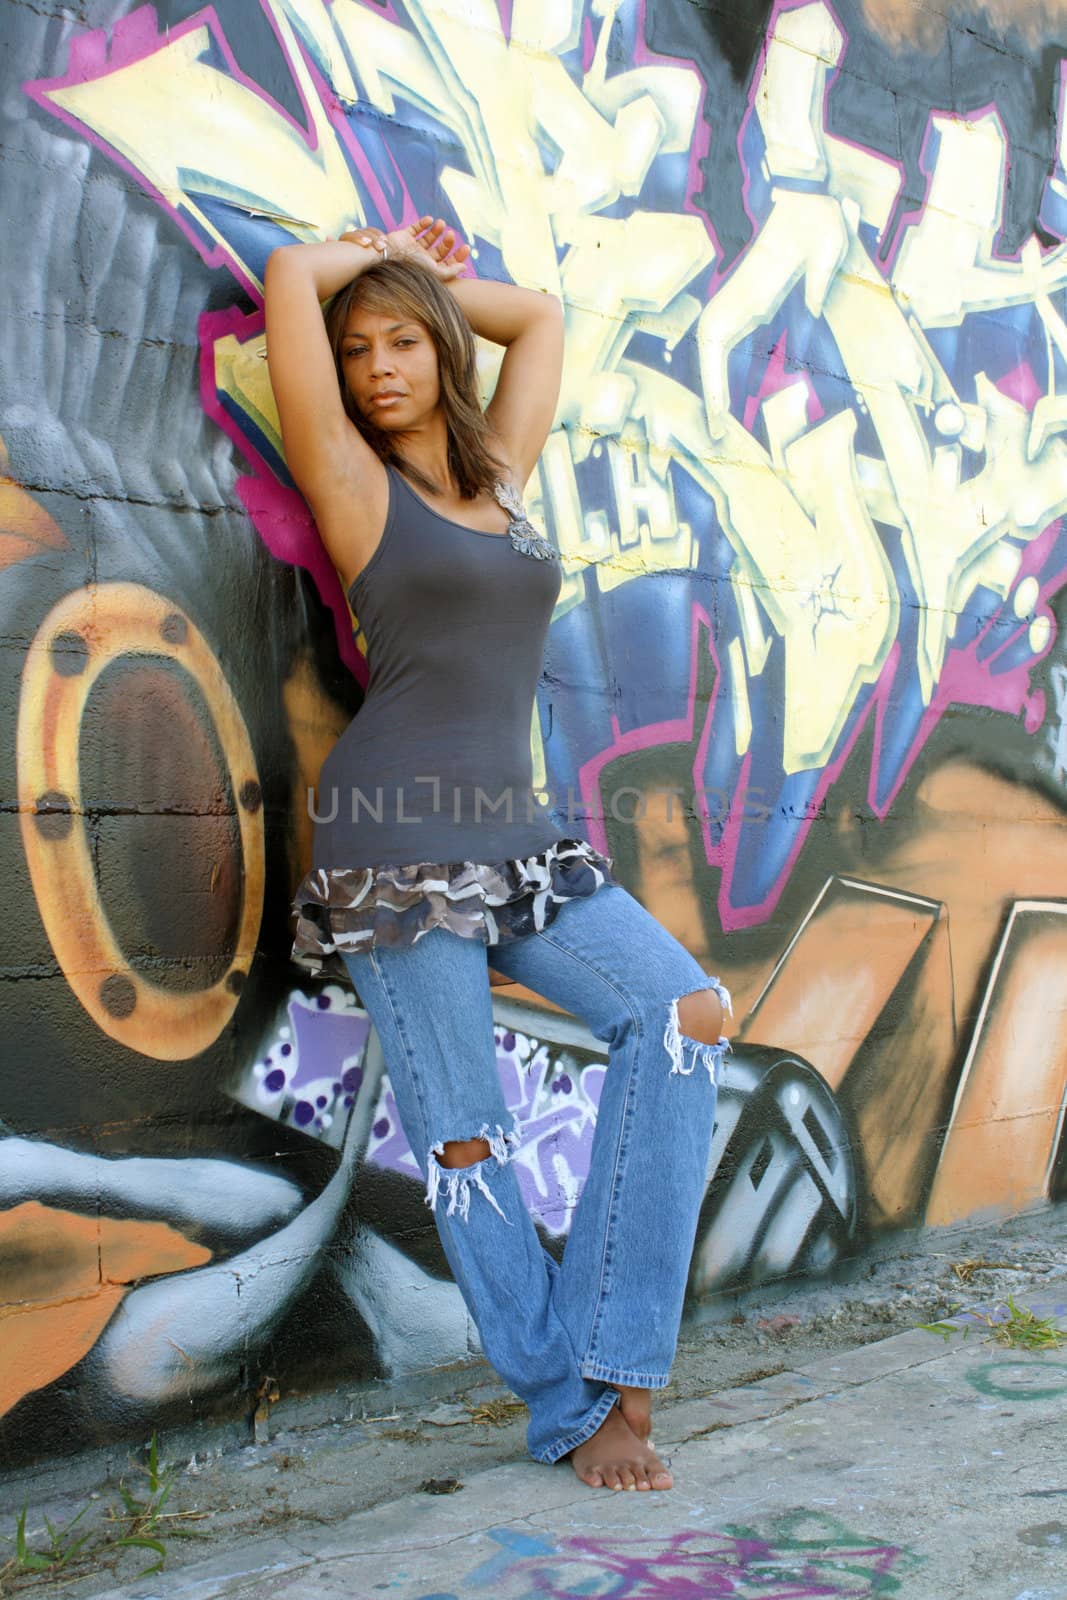 Beautiful Mature Black Woman with Graffiti (3) by csproductions